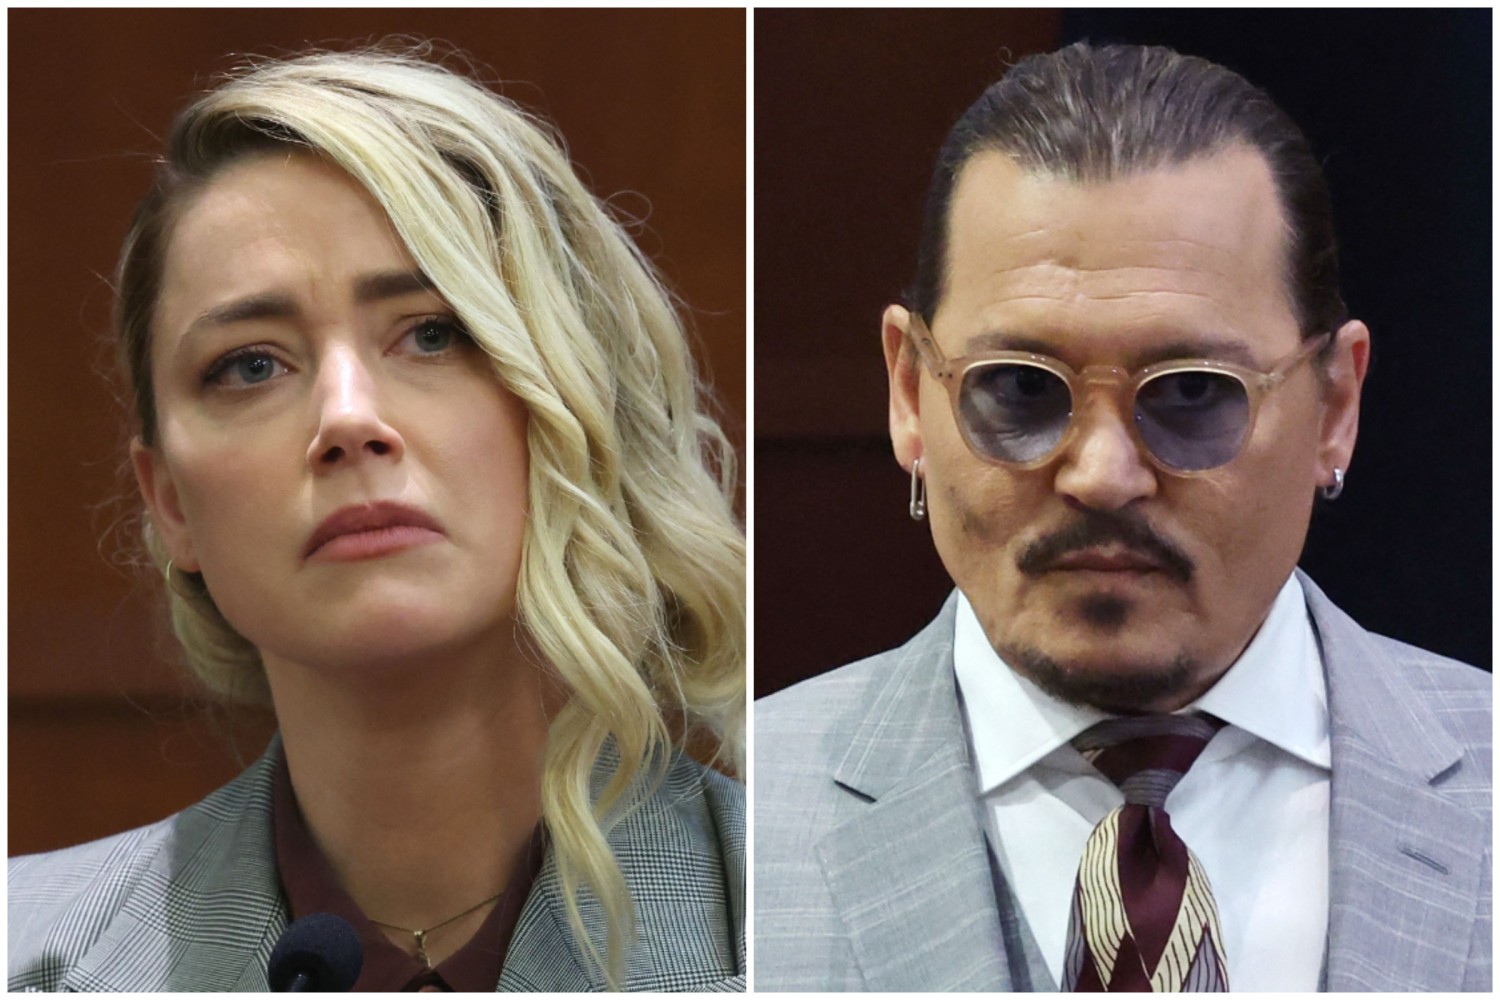 Amber Heard (L) and Johnny Depp (R) are returning to court for the final day of their defamation trial on Friday. MICHAEL REYNOLDS/POOL/AFP VIA GETTY IMAGES